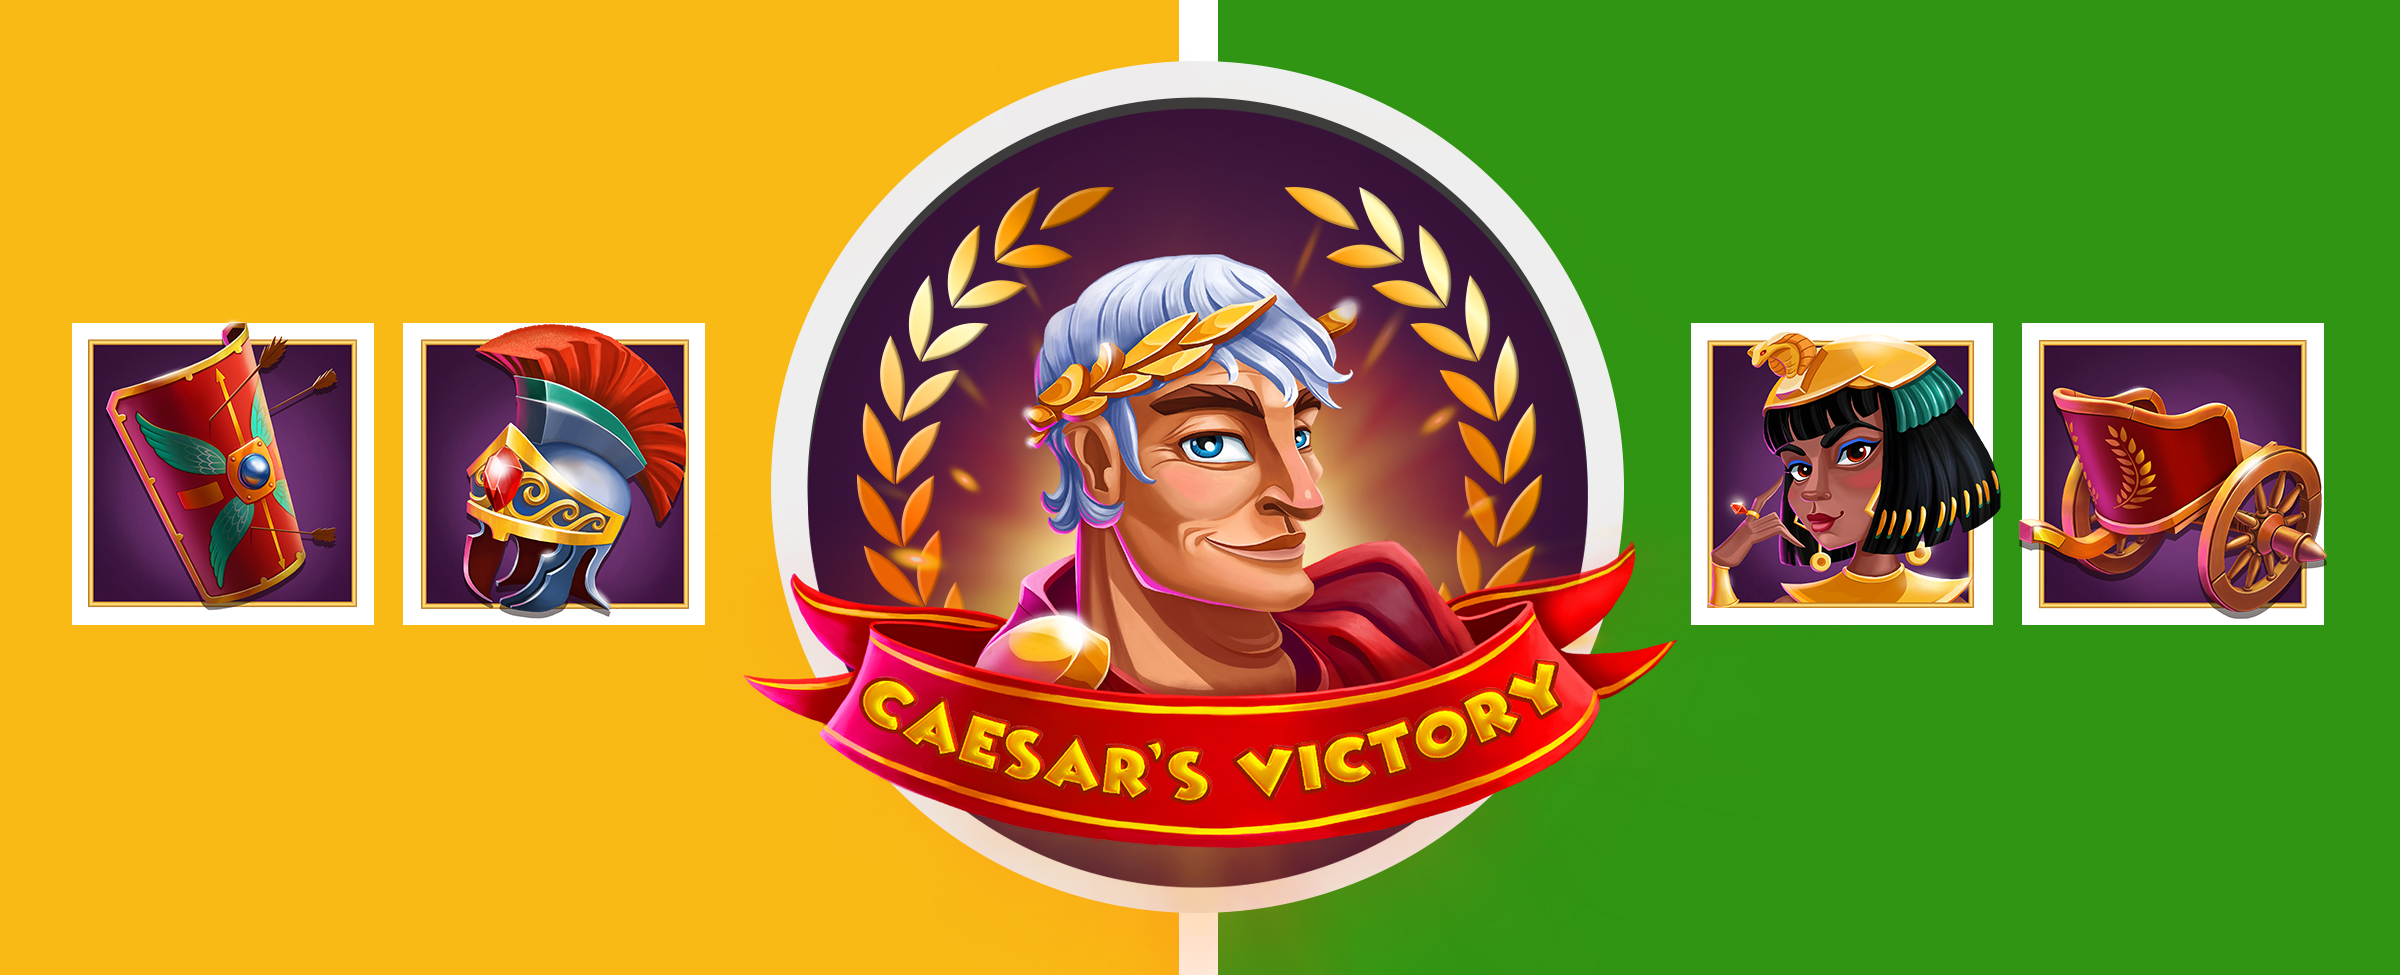 What features await you in this kingdom? Take a look at what Caesar's Victory has to offer.